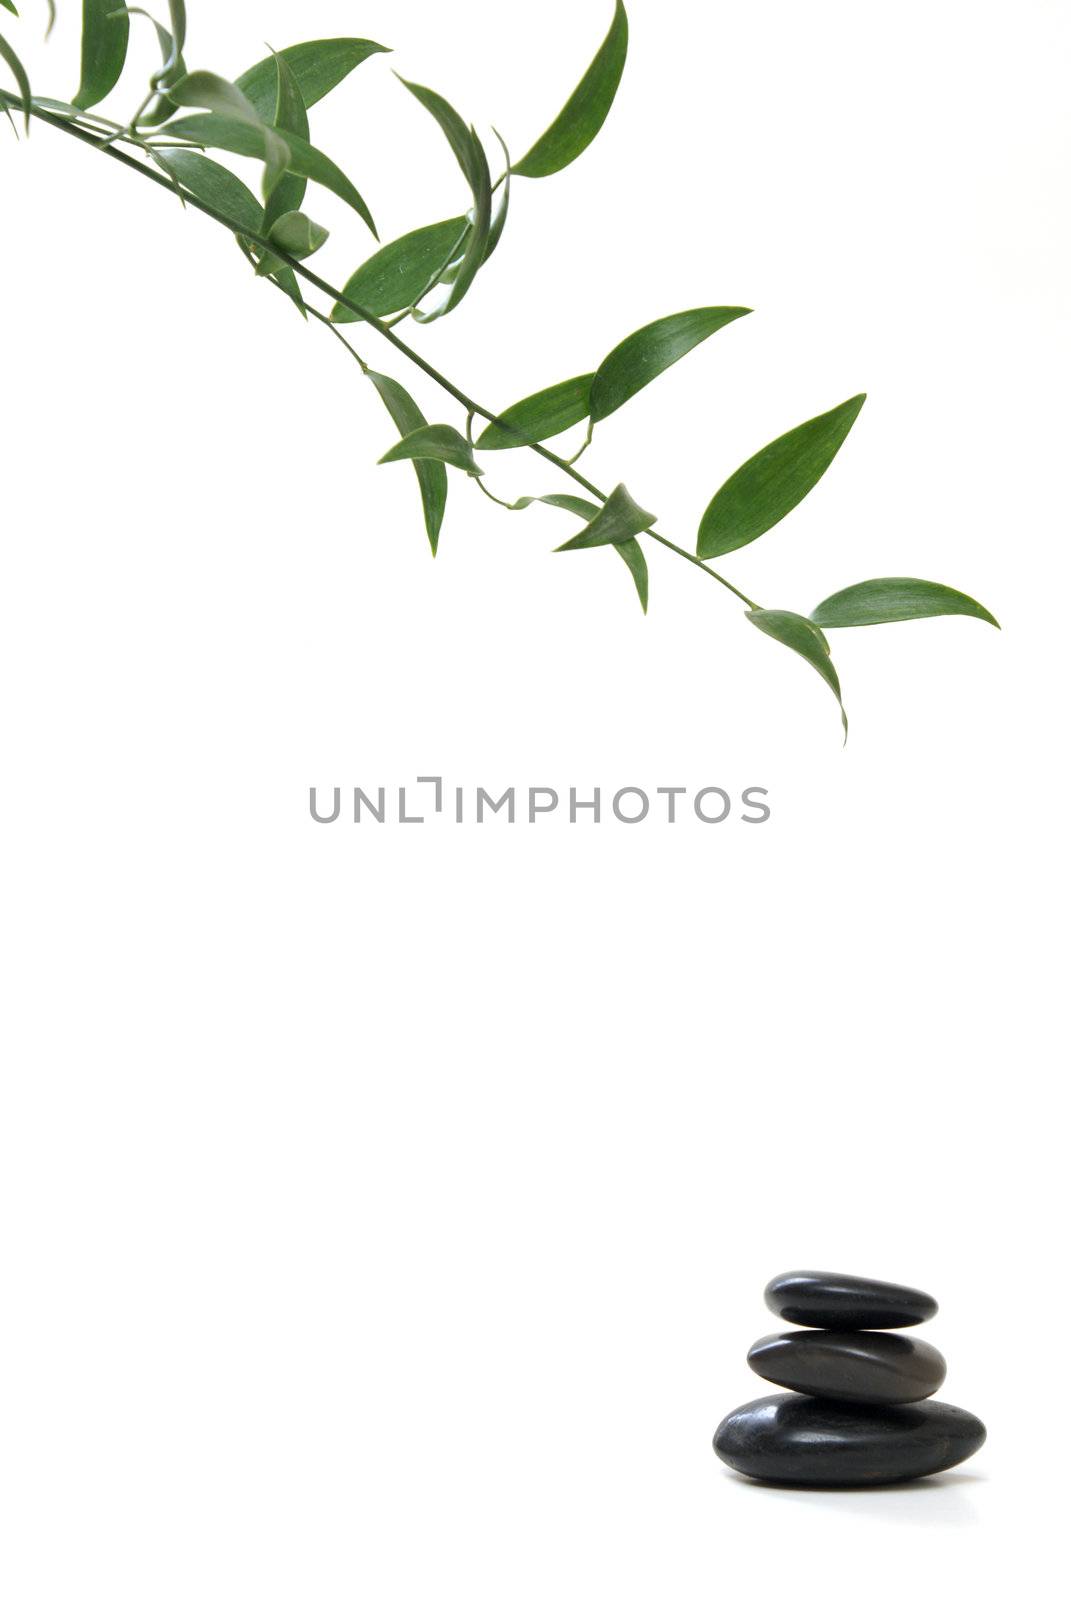 A stack of stones and a branch of leaves isolated on white.